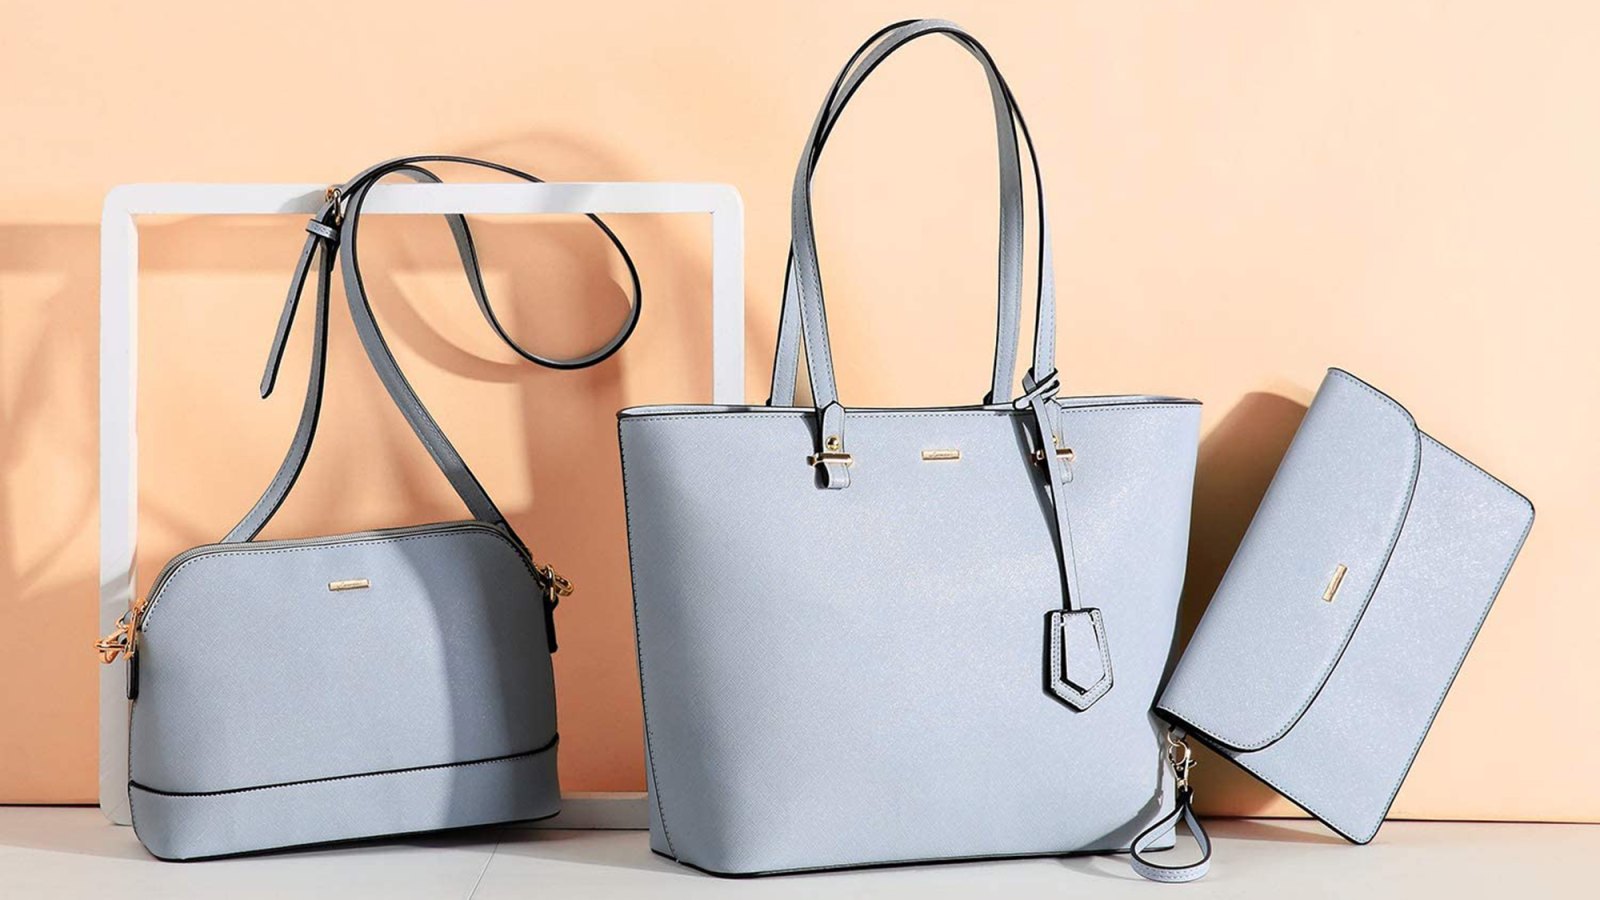 $25 for 3 Generic lady fashion handbags all in picture - clothing &  accessories - by owner - apparel sale - craigslist